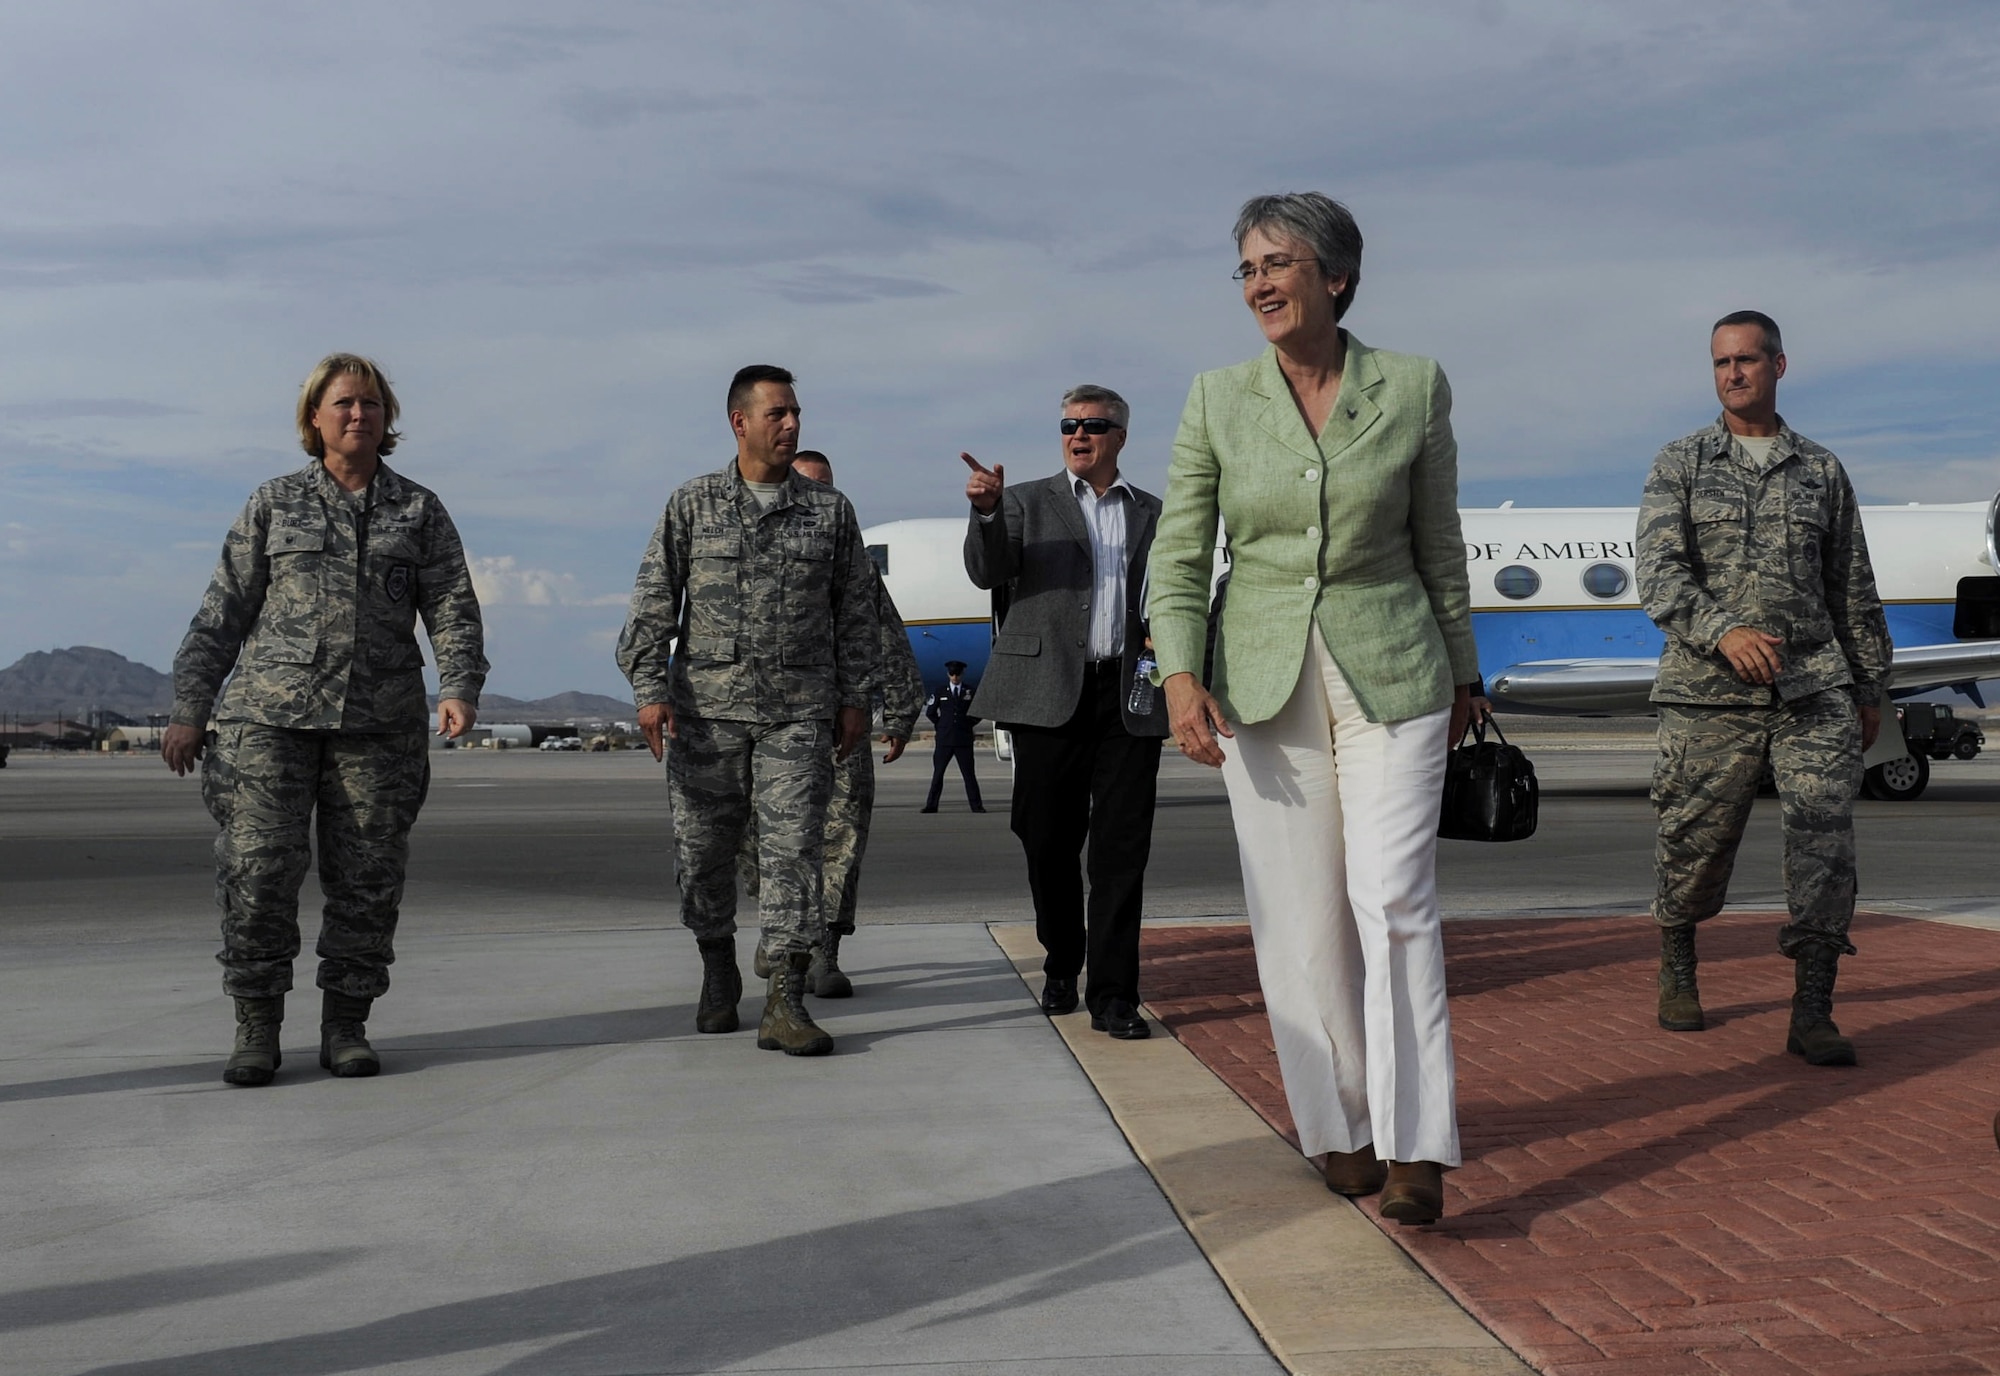 Air Force Secretary Heather Wilson arrives at Nellis Air Force Base, Nev., July 17, 2017. During her visit, Wilson saw firsthand how Nellis is at the forefront of modernization. (U.S. Air Force photo by Senior Airman Kevin Tanenbaum)